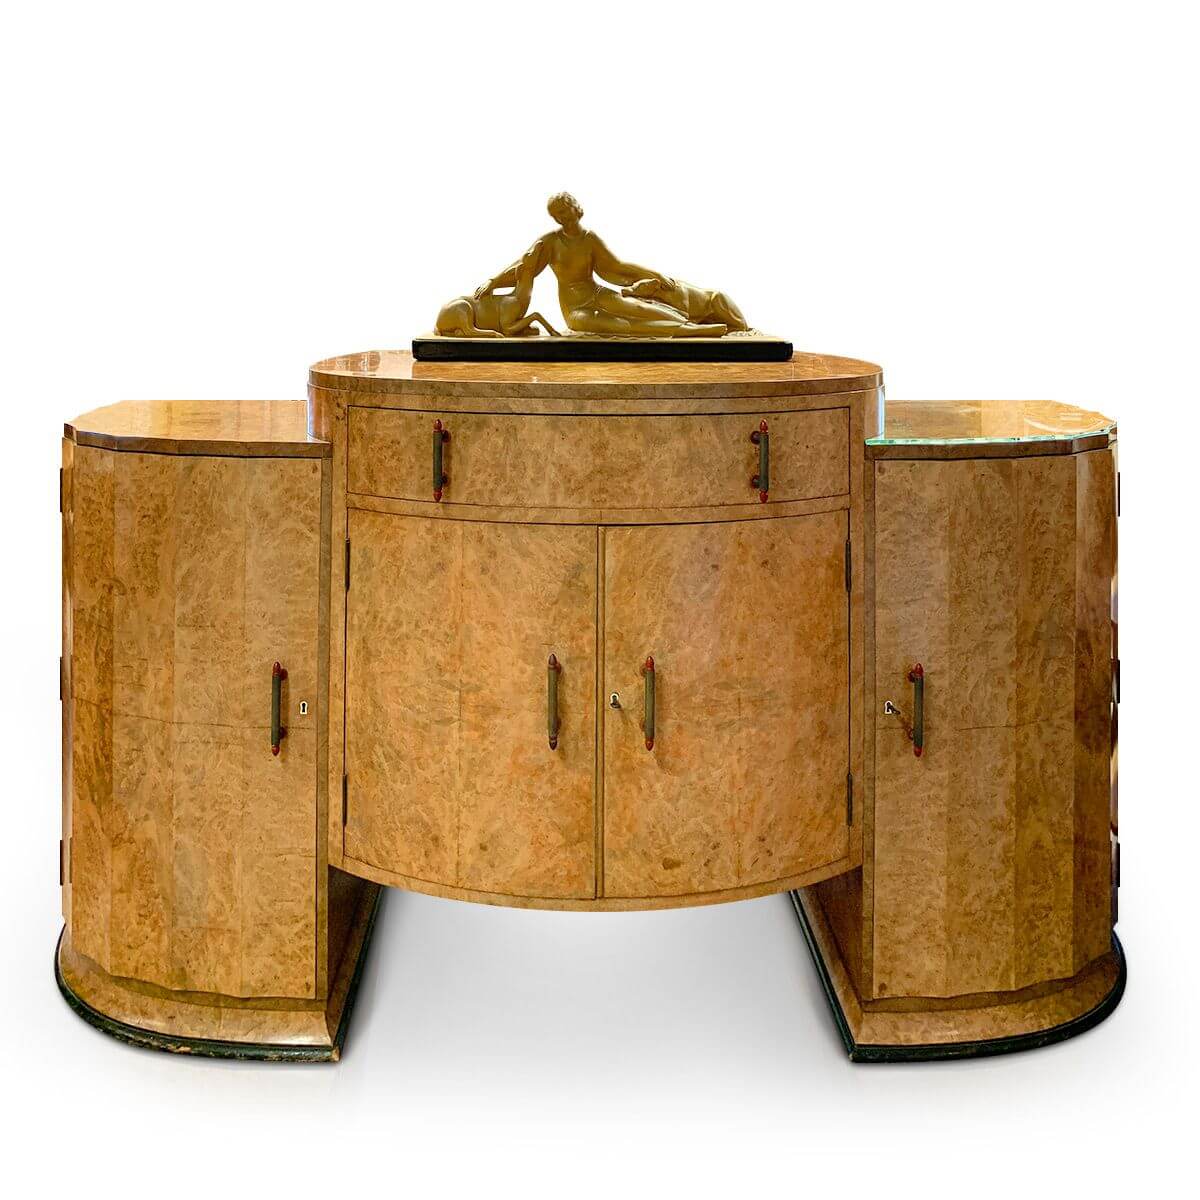 Art Deco Sideboard attributed to Waring and Gillow